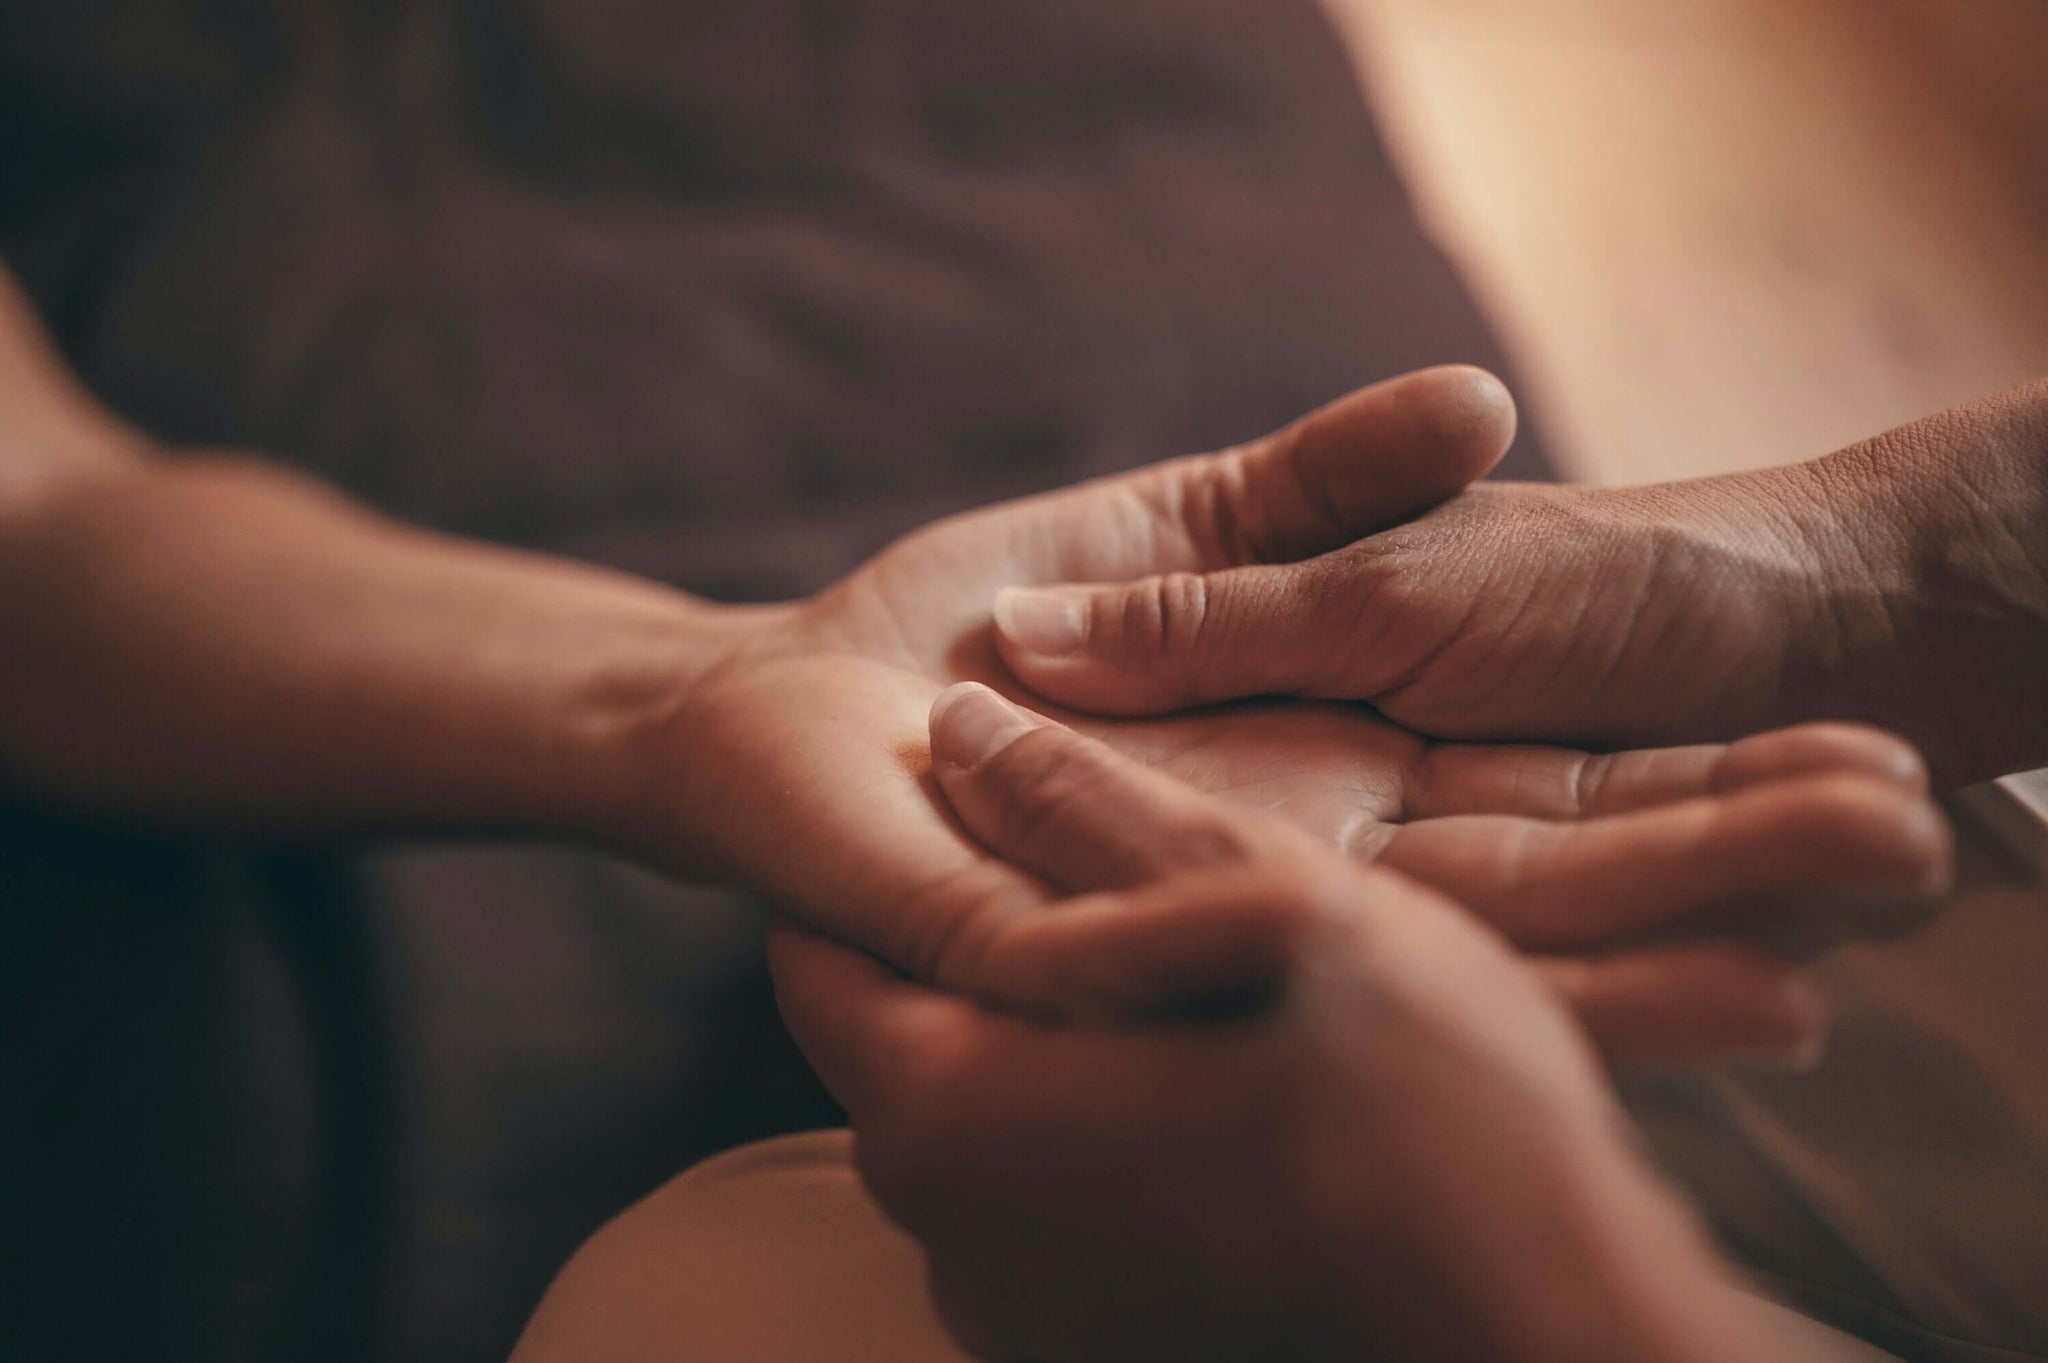 Man giving a massage to a woman on her palm